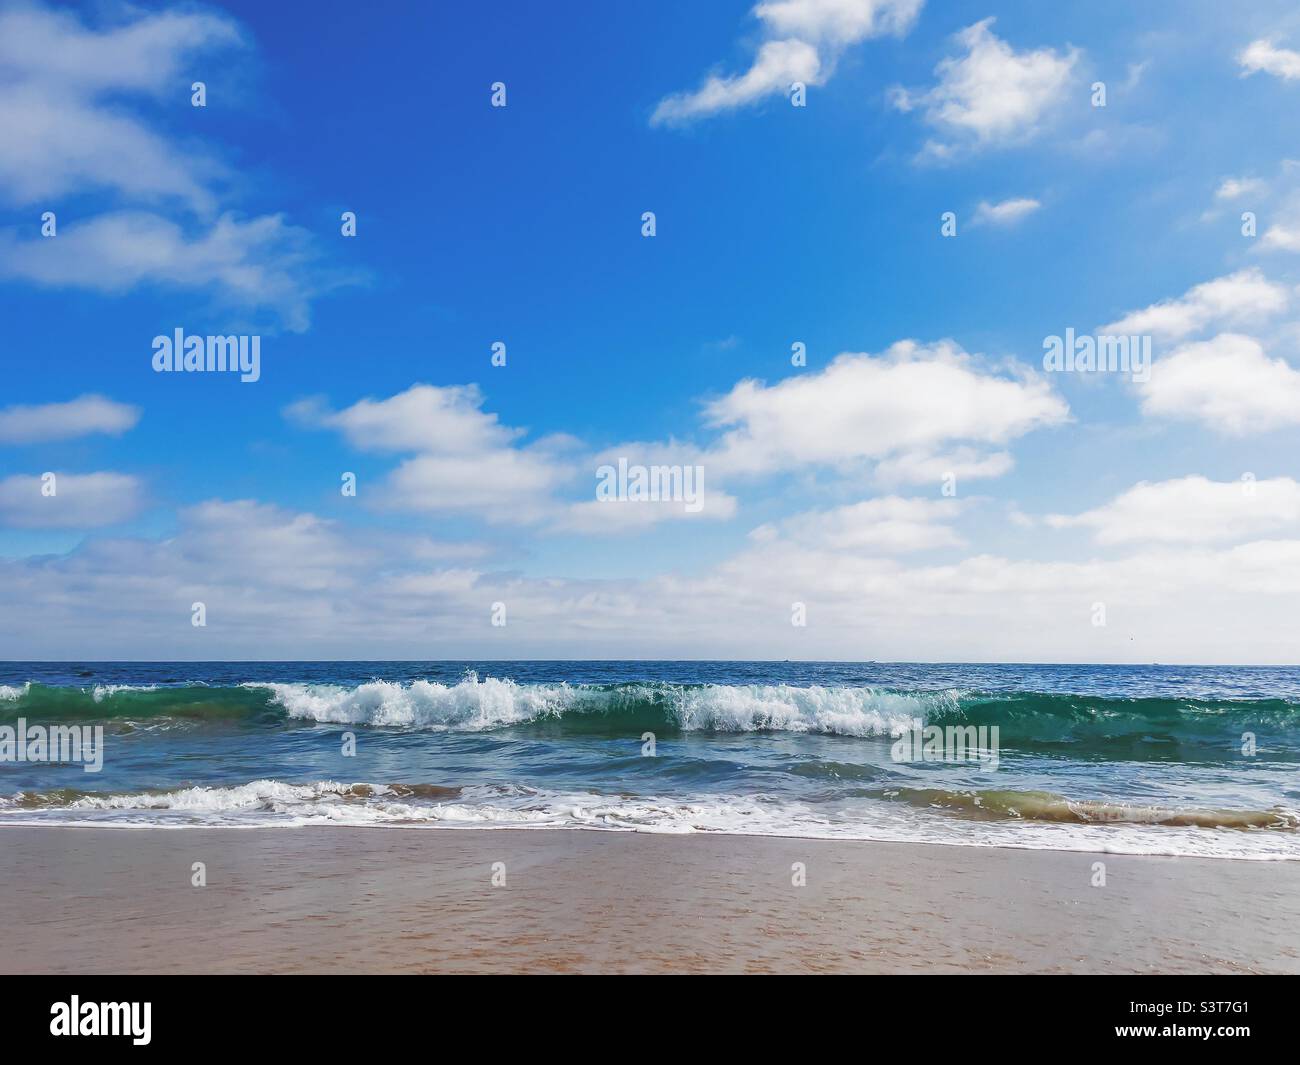 Seascape with waves breaking over sandy beach under a blue sky and white clouds. Stock Photo